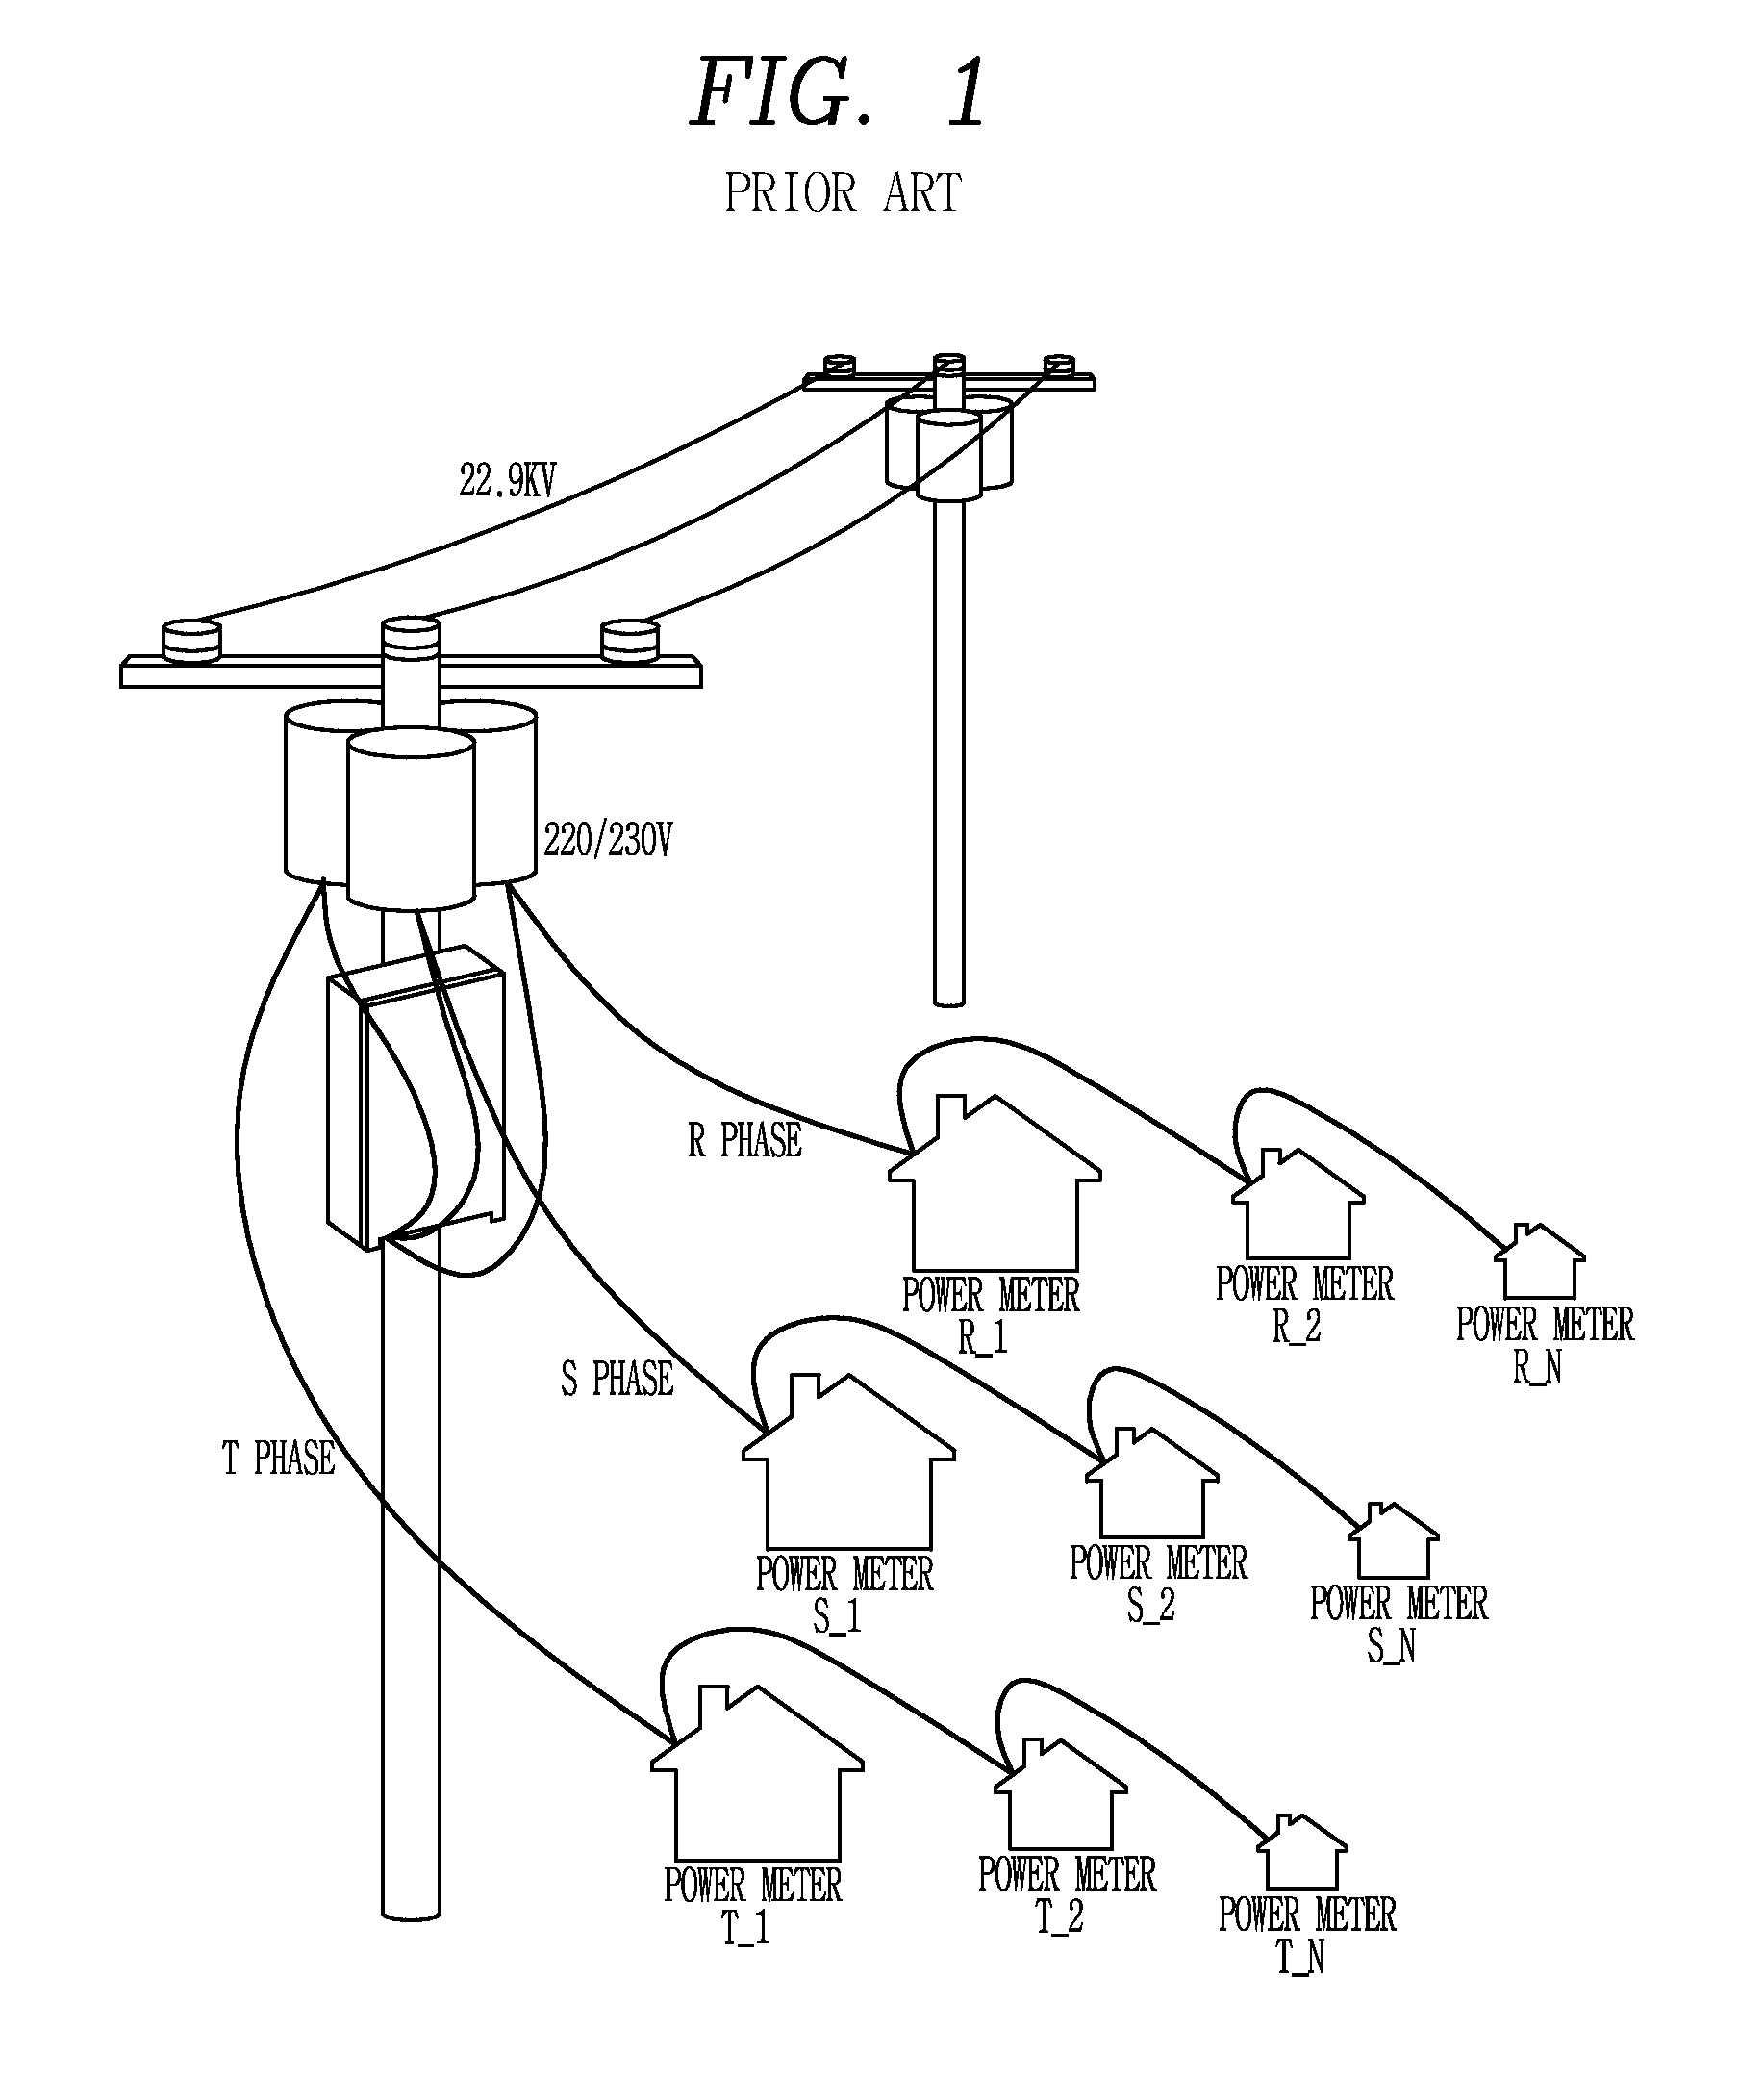 Apparatus for power line communication